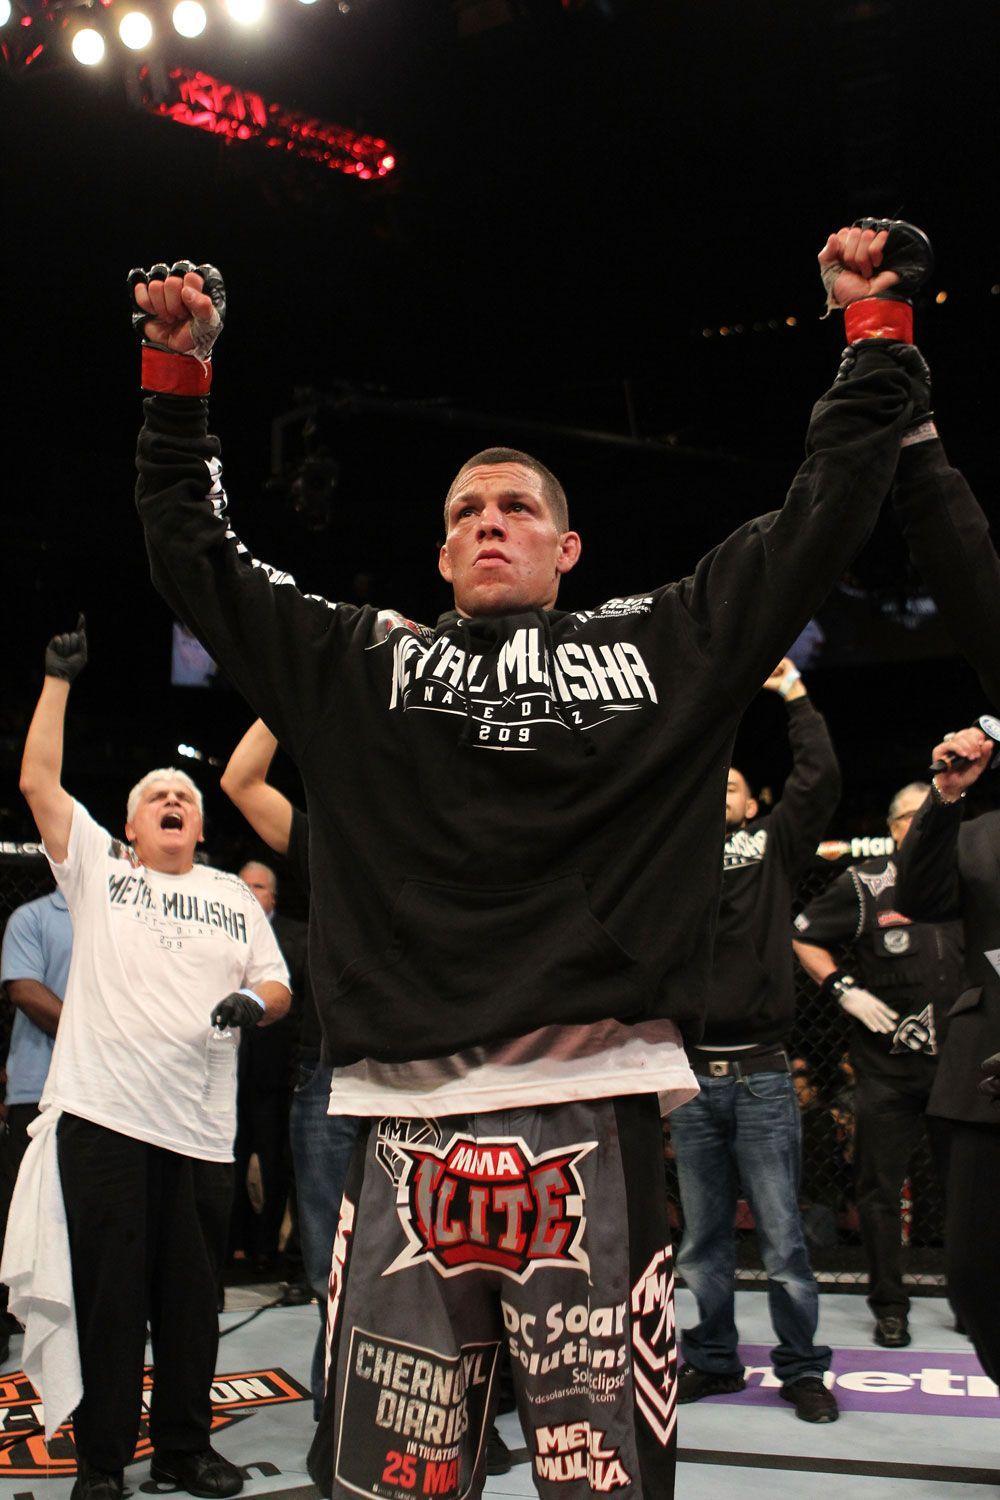 Nate Diaz, younger brother to Nick Diaz, is a well accomplished MMA